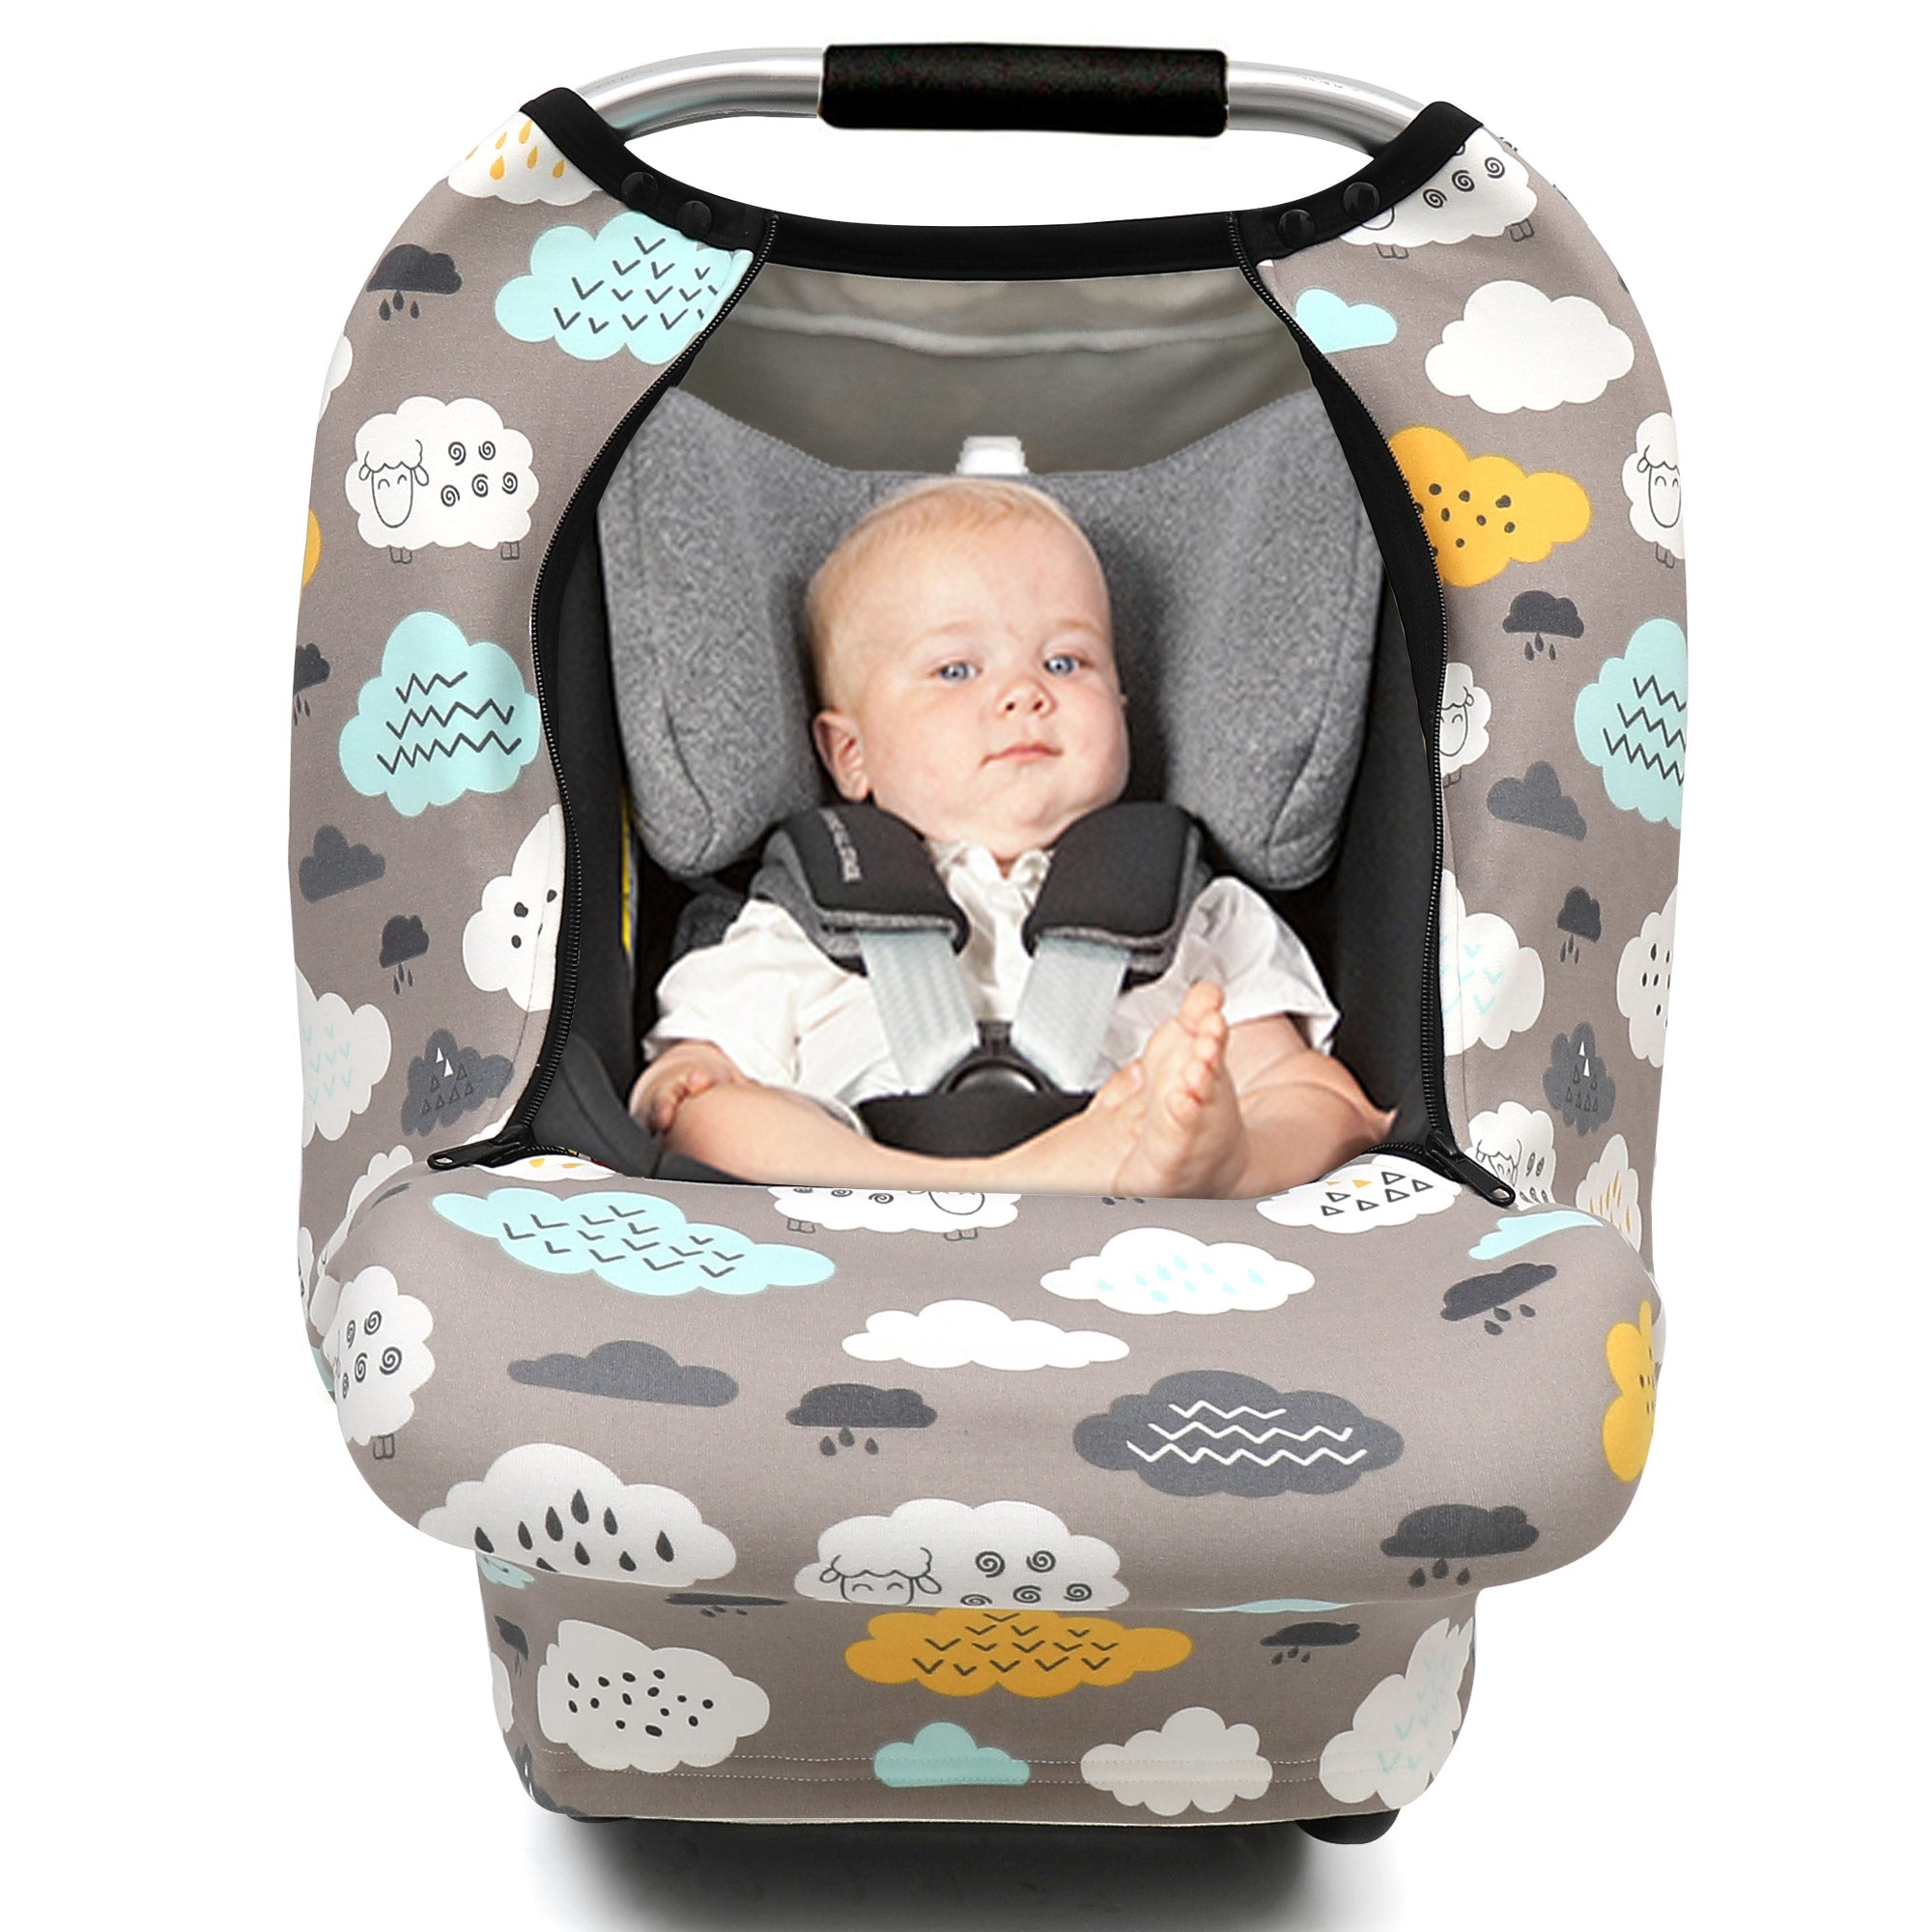  Baby Car Seat Covers-Acrabros Multifunctional Infant